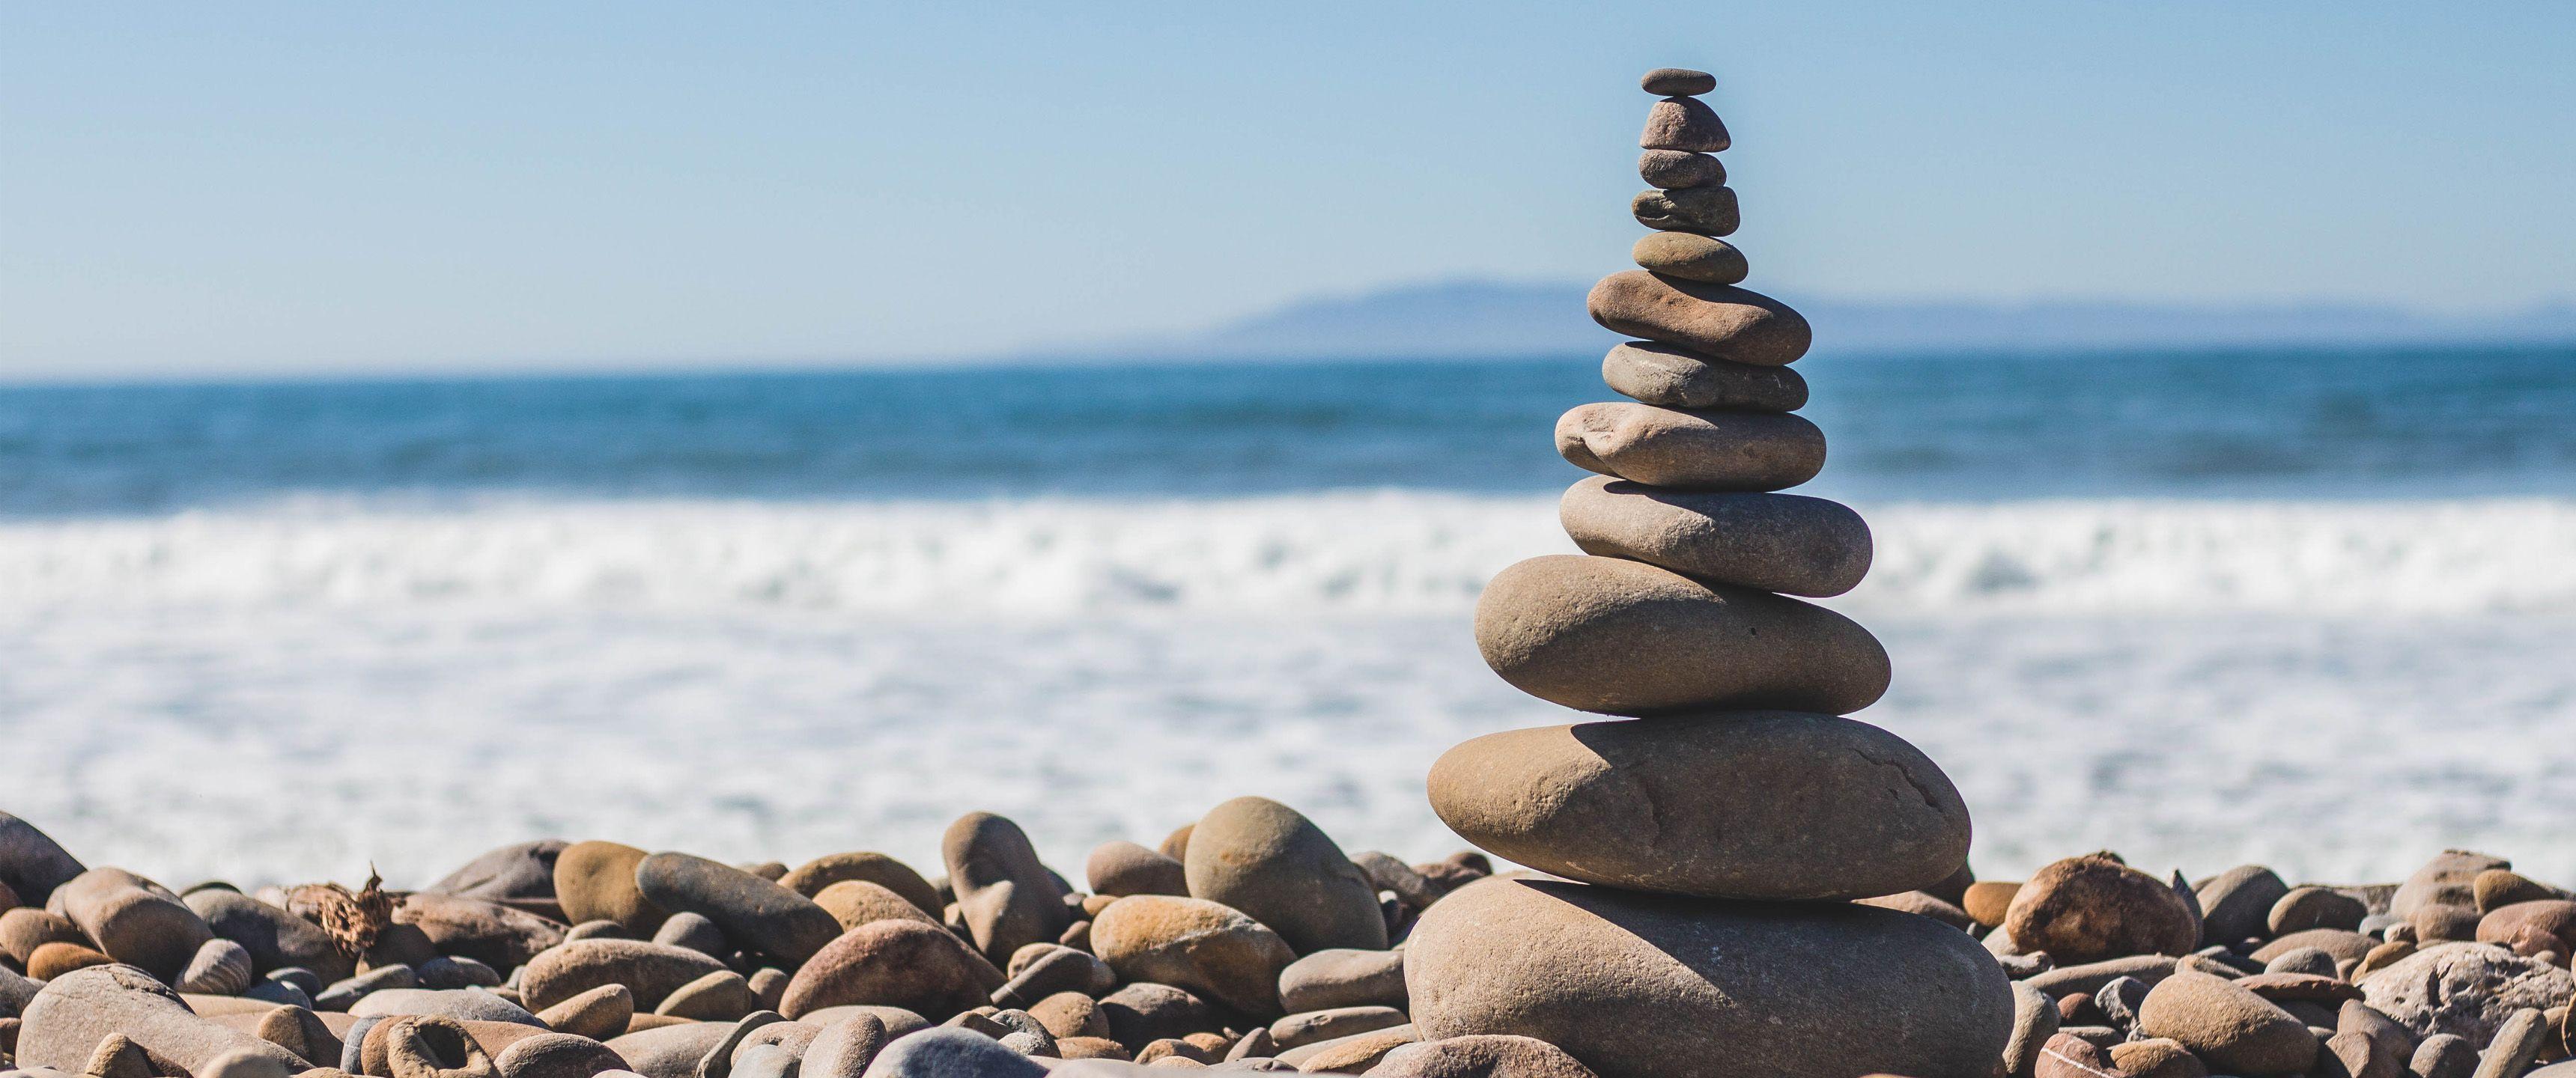 Perfect Balance:9 Ultrawide HD Wallpaper (3440x1440). Life, Acupuncture, Beach